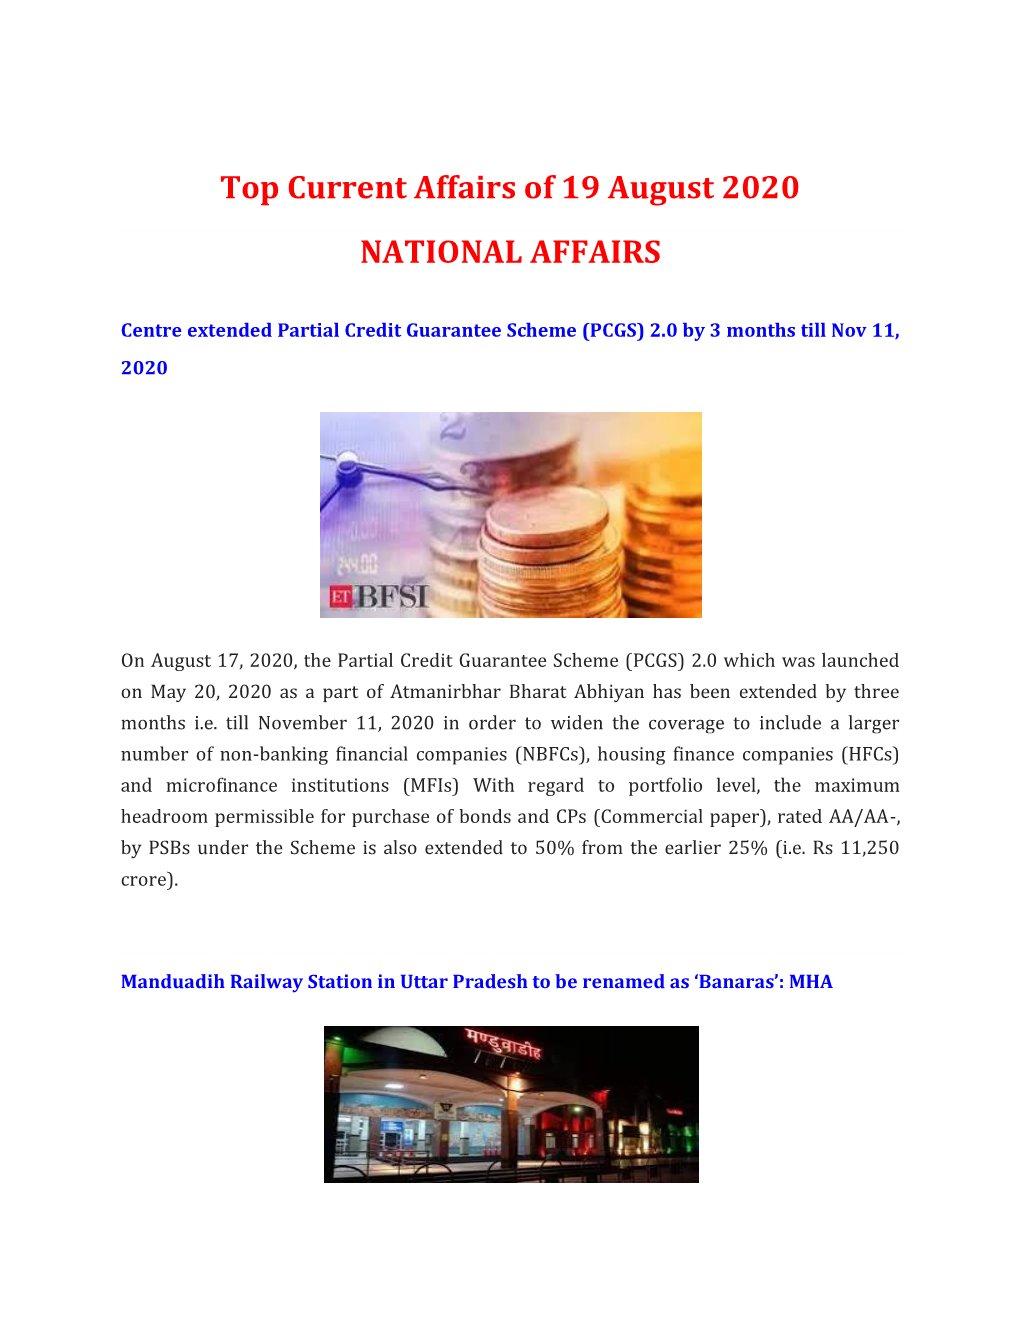 Top Current Affairs of 19 August 2020 NATIONAL AFFAIRS